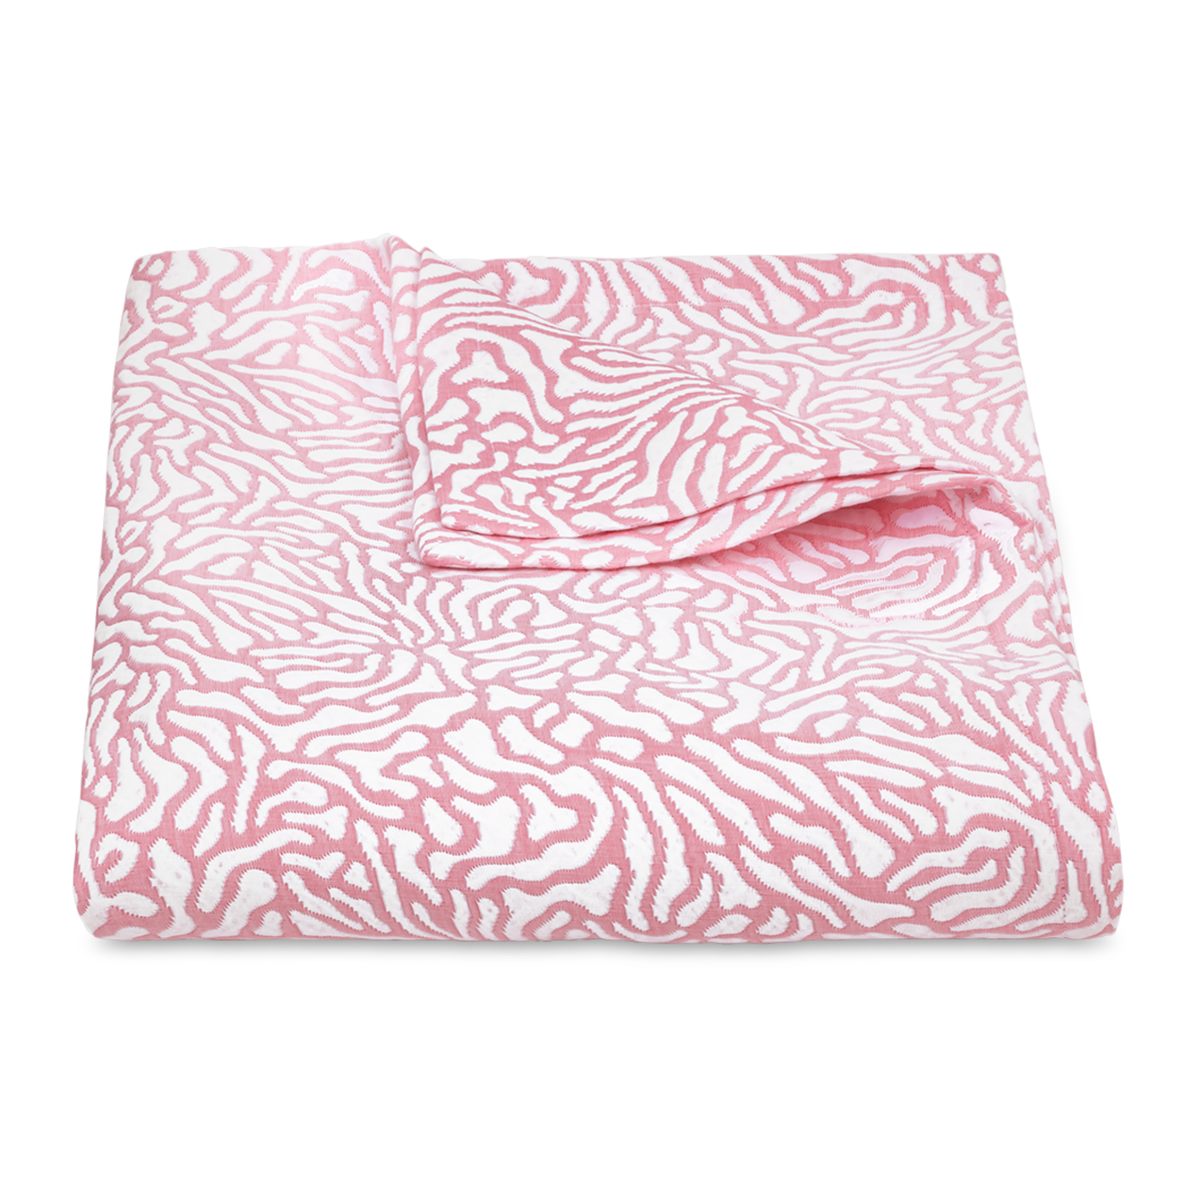 Folded Duvet Cover of Matouk Schumacher Cora Bedding in Peony Color